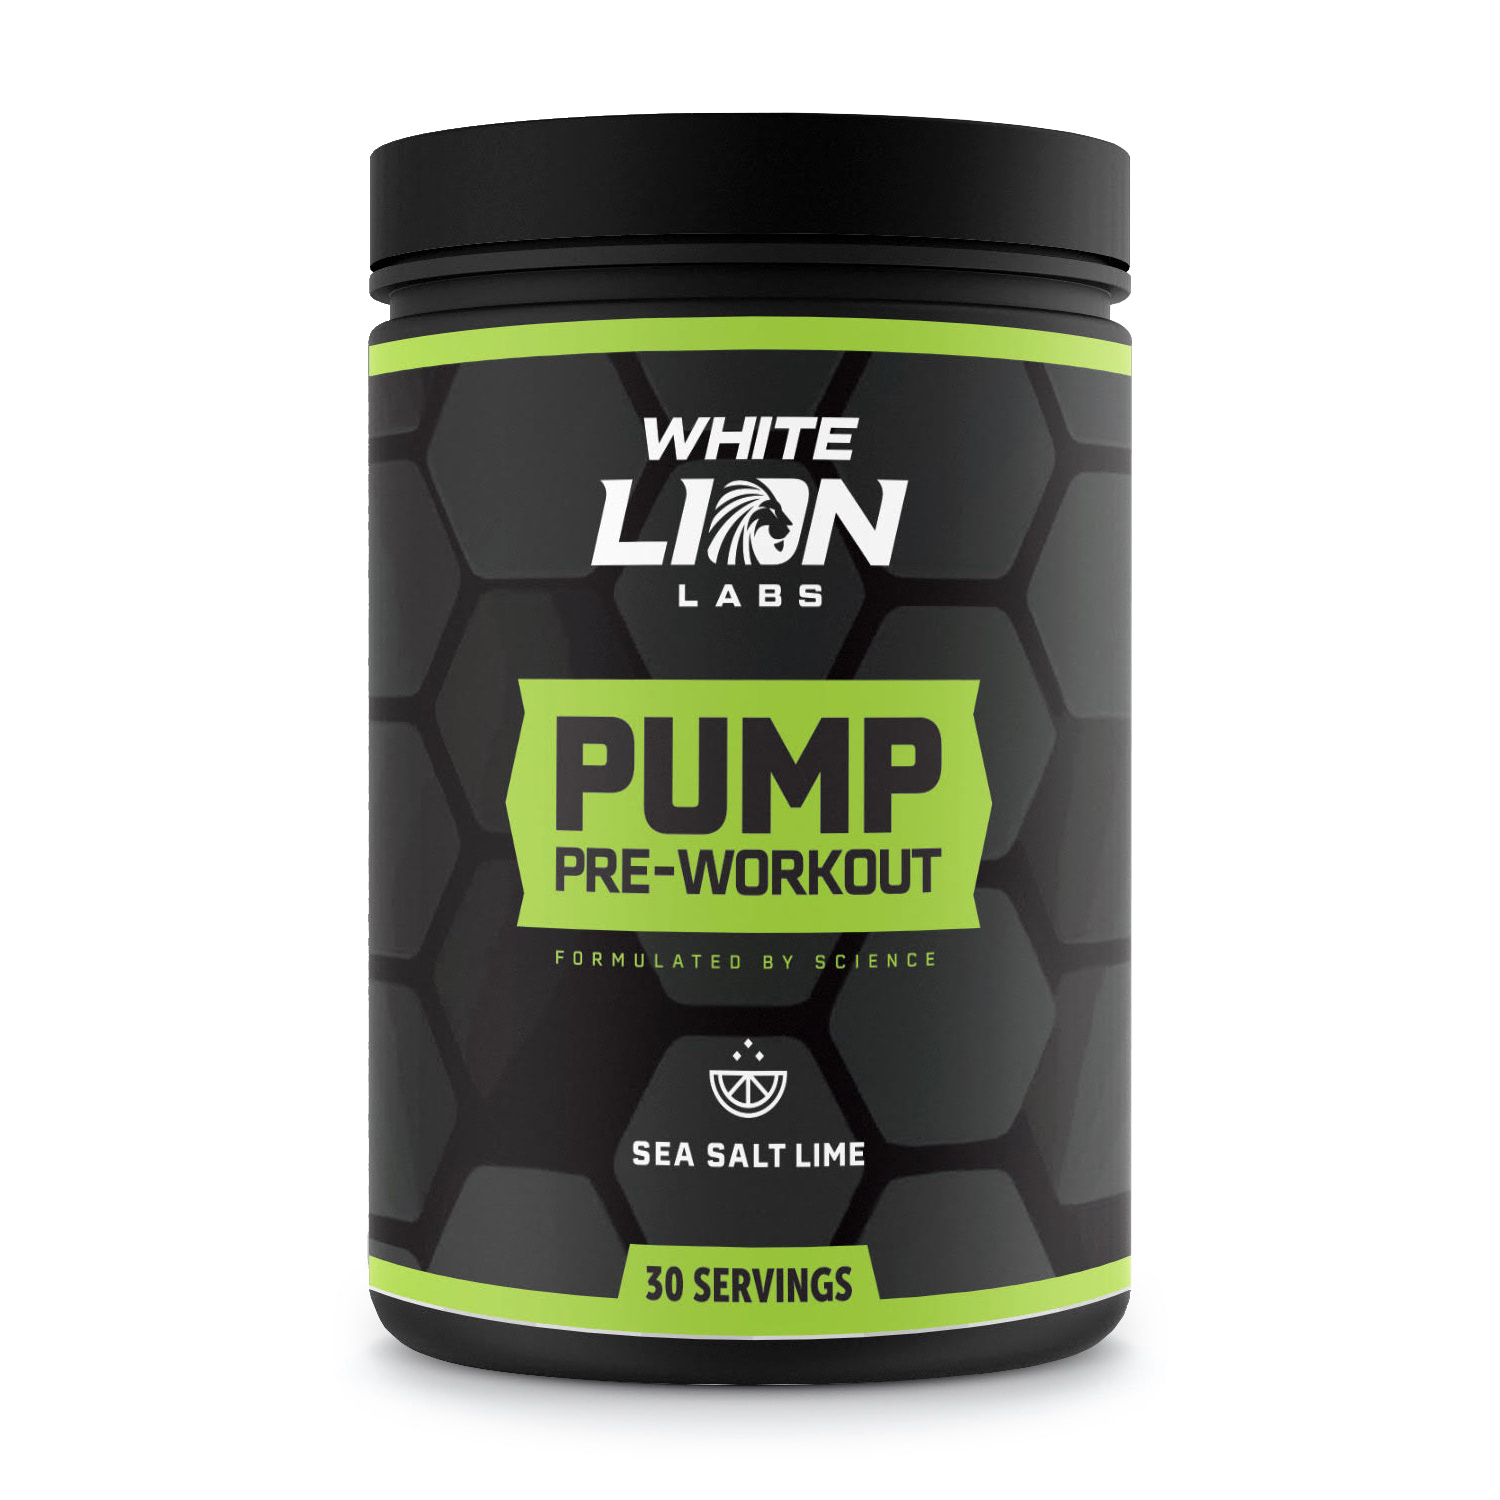 White Lion Labs PUMP pre-workout packaging